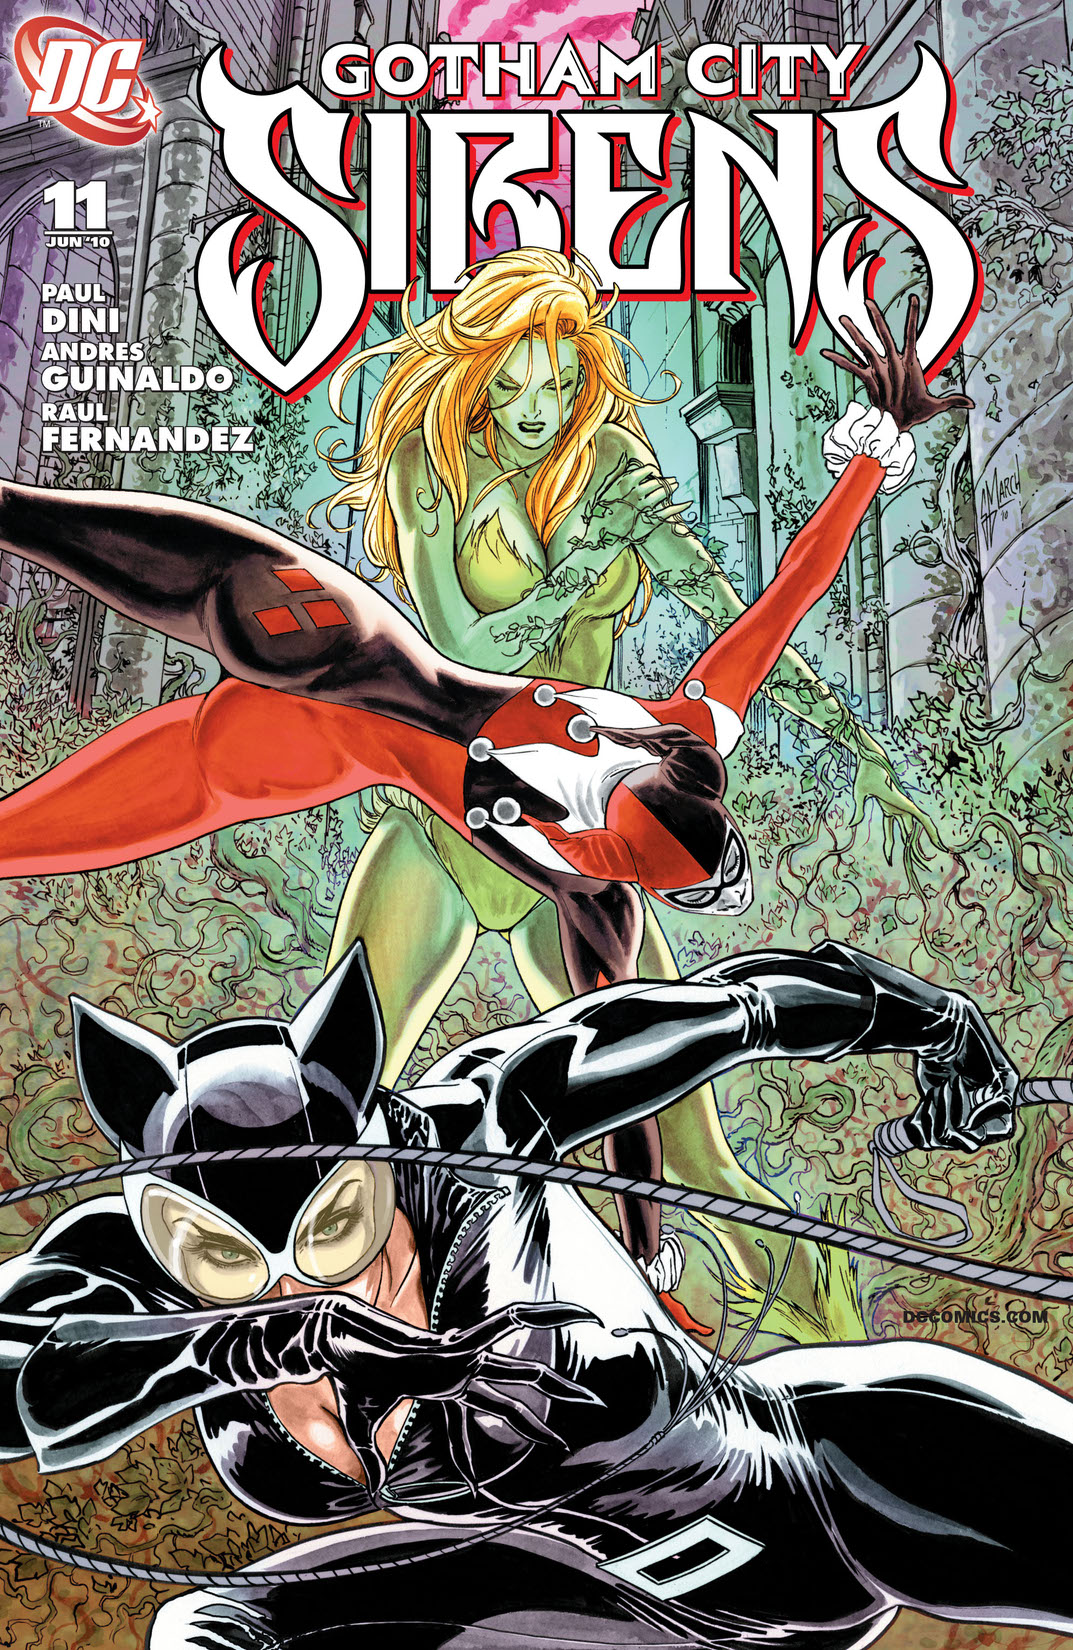 Gotham City Sirens #11 preview images